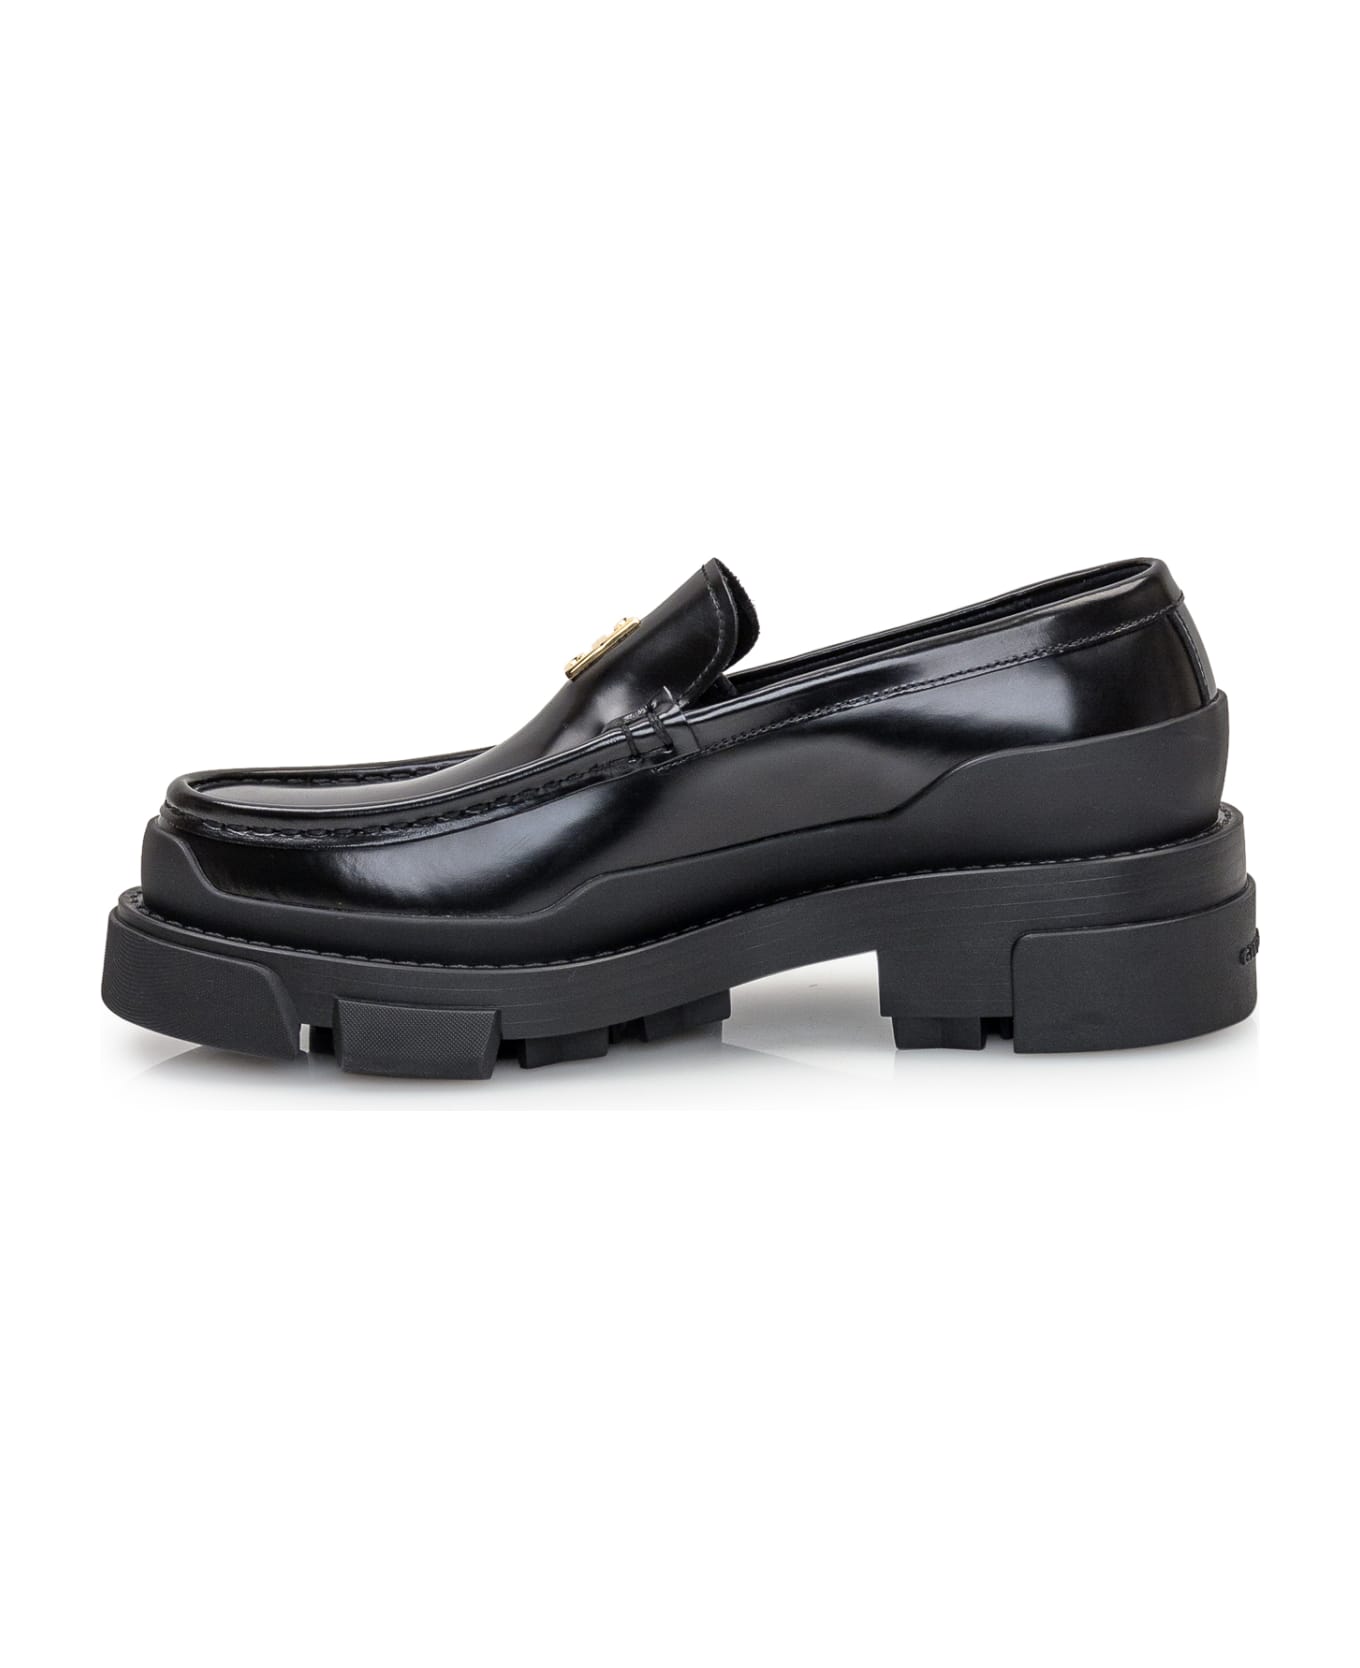 Givenchy Terra Leather Loafers - Black